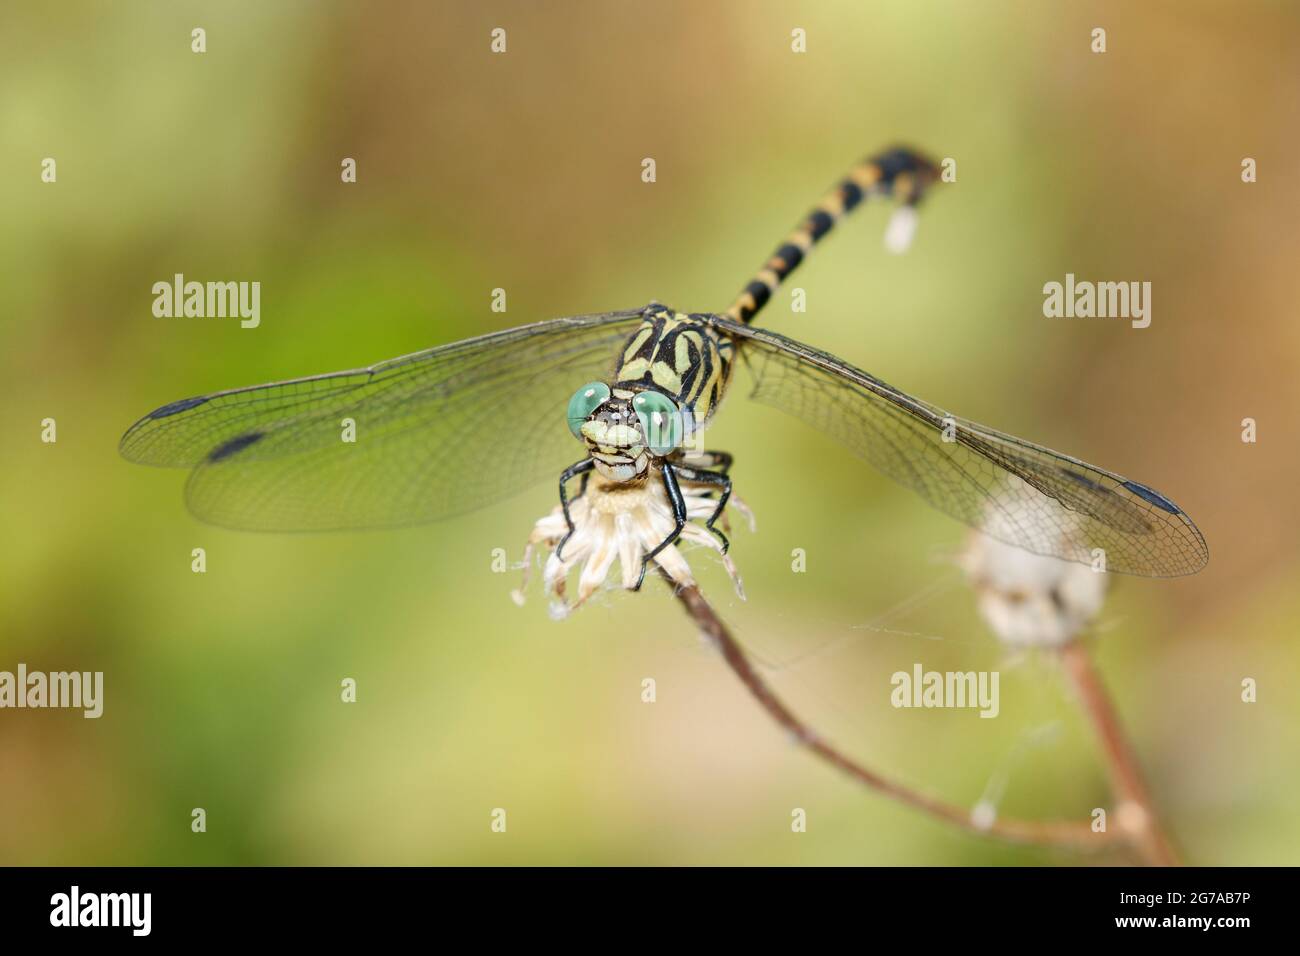 Small Pincertail Dragonfly (Onychogomphus forcipatus) in southern Europe Stock Photo